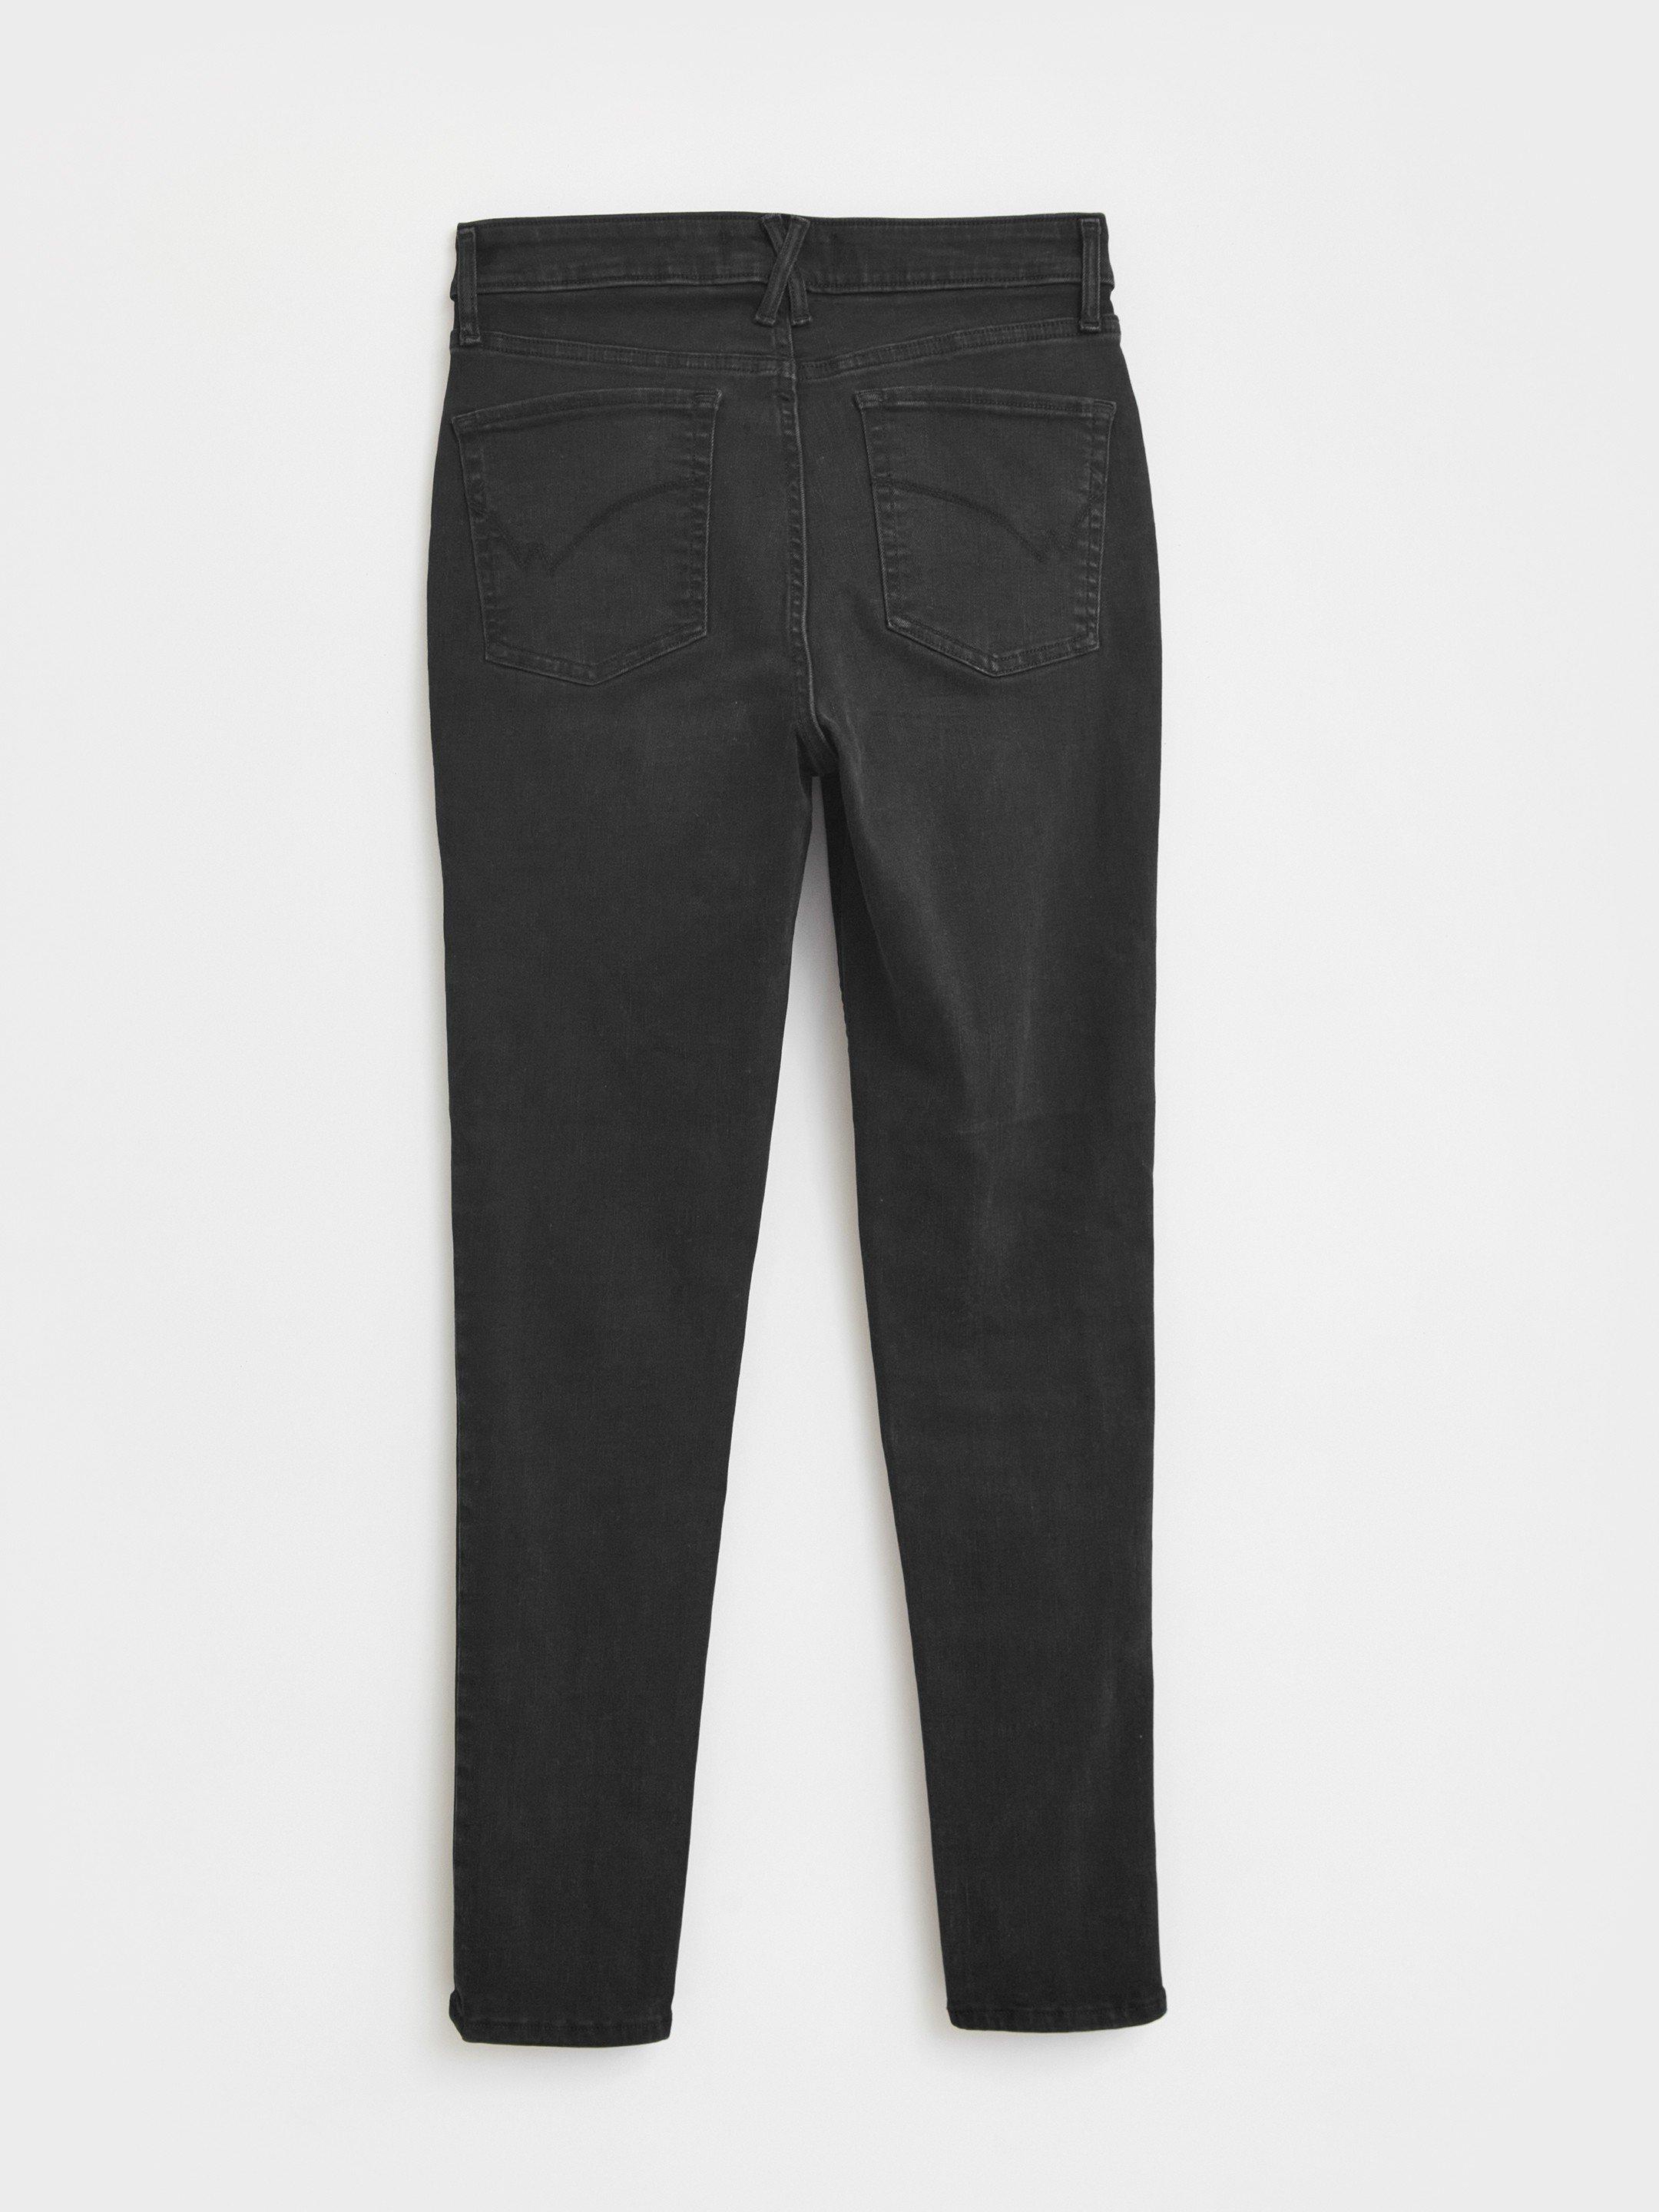 Amelia Mid Rise Skinny Jean in WASHED BLK - FLAT BACK